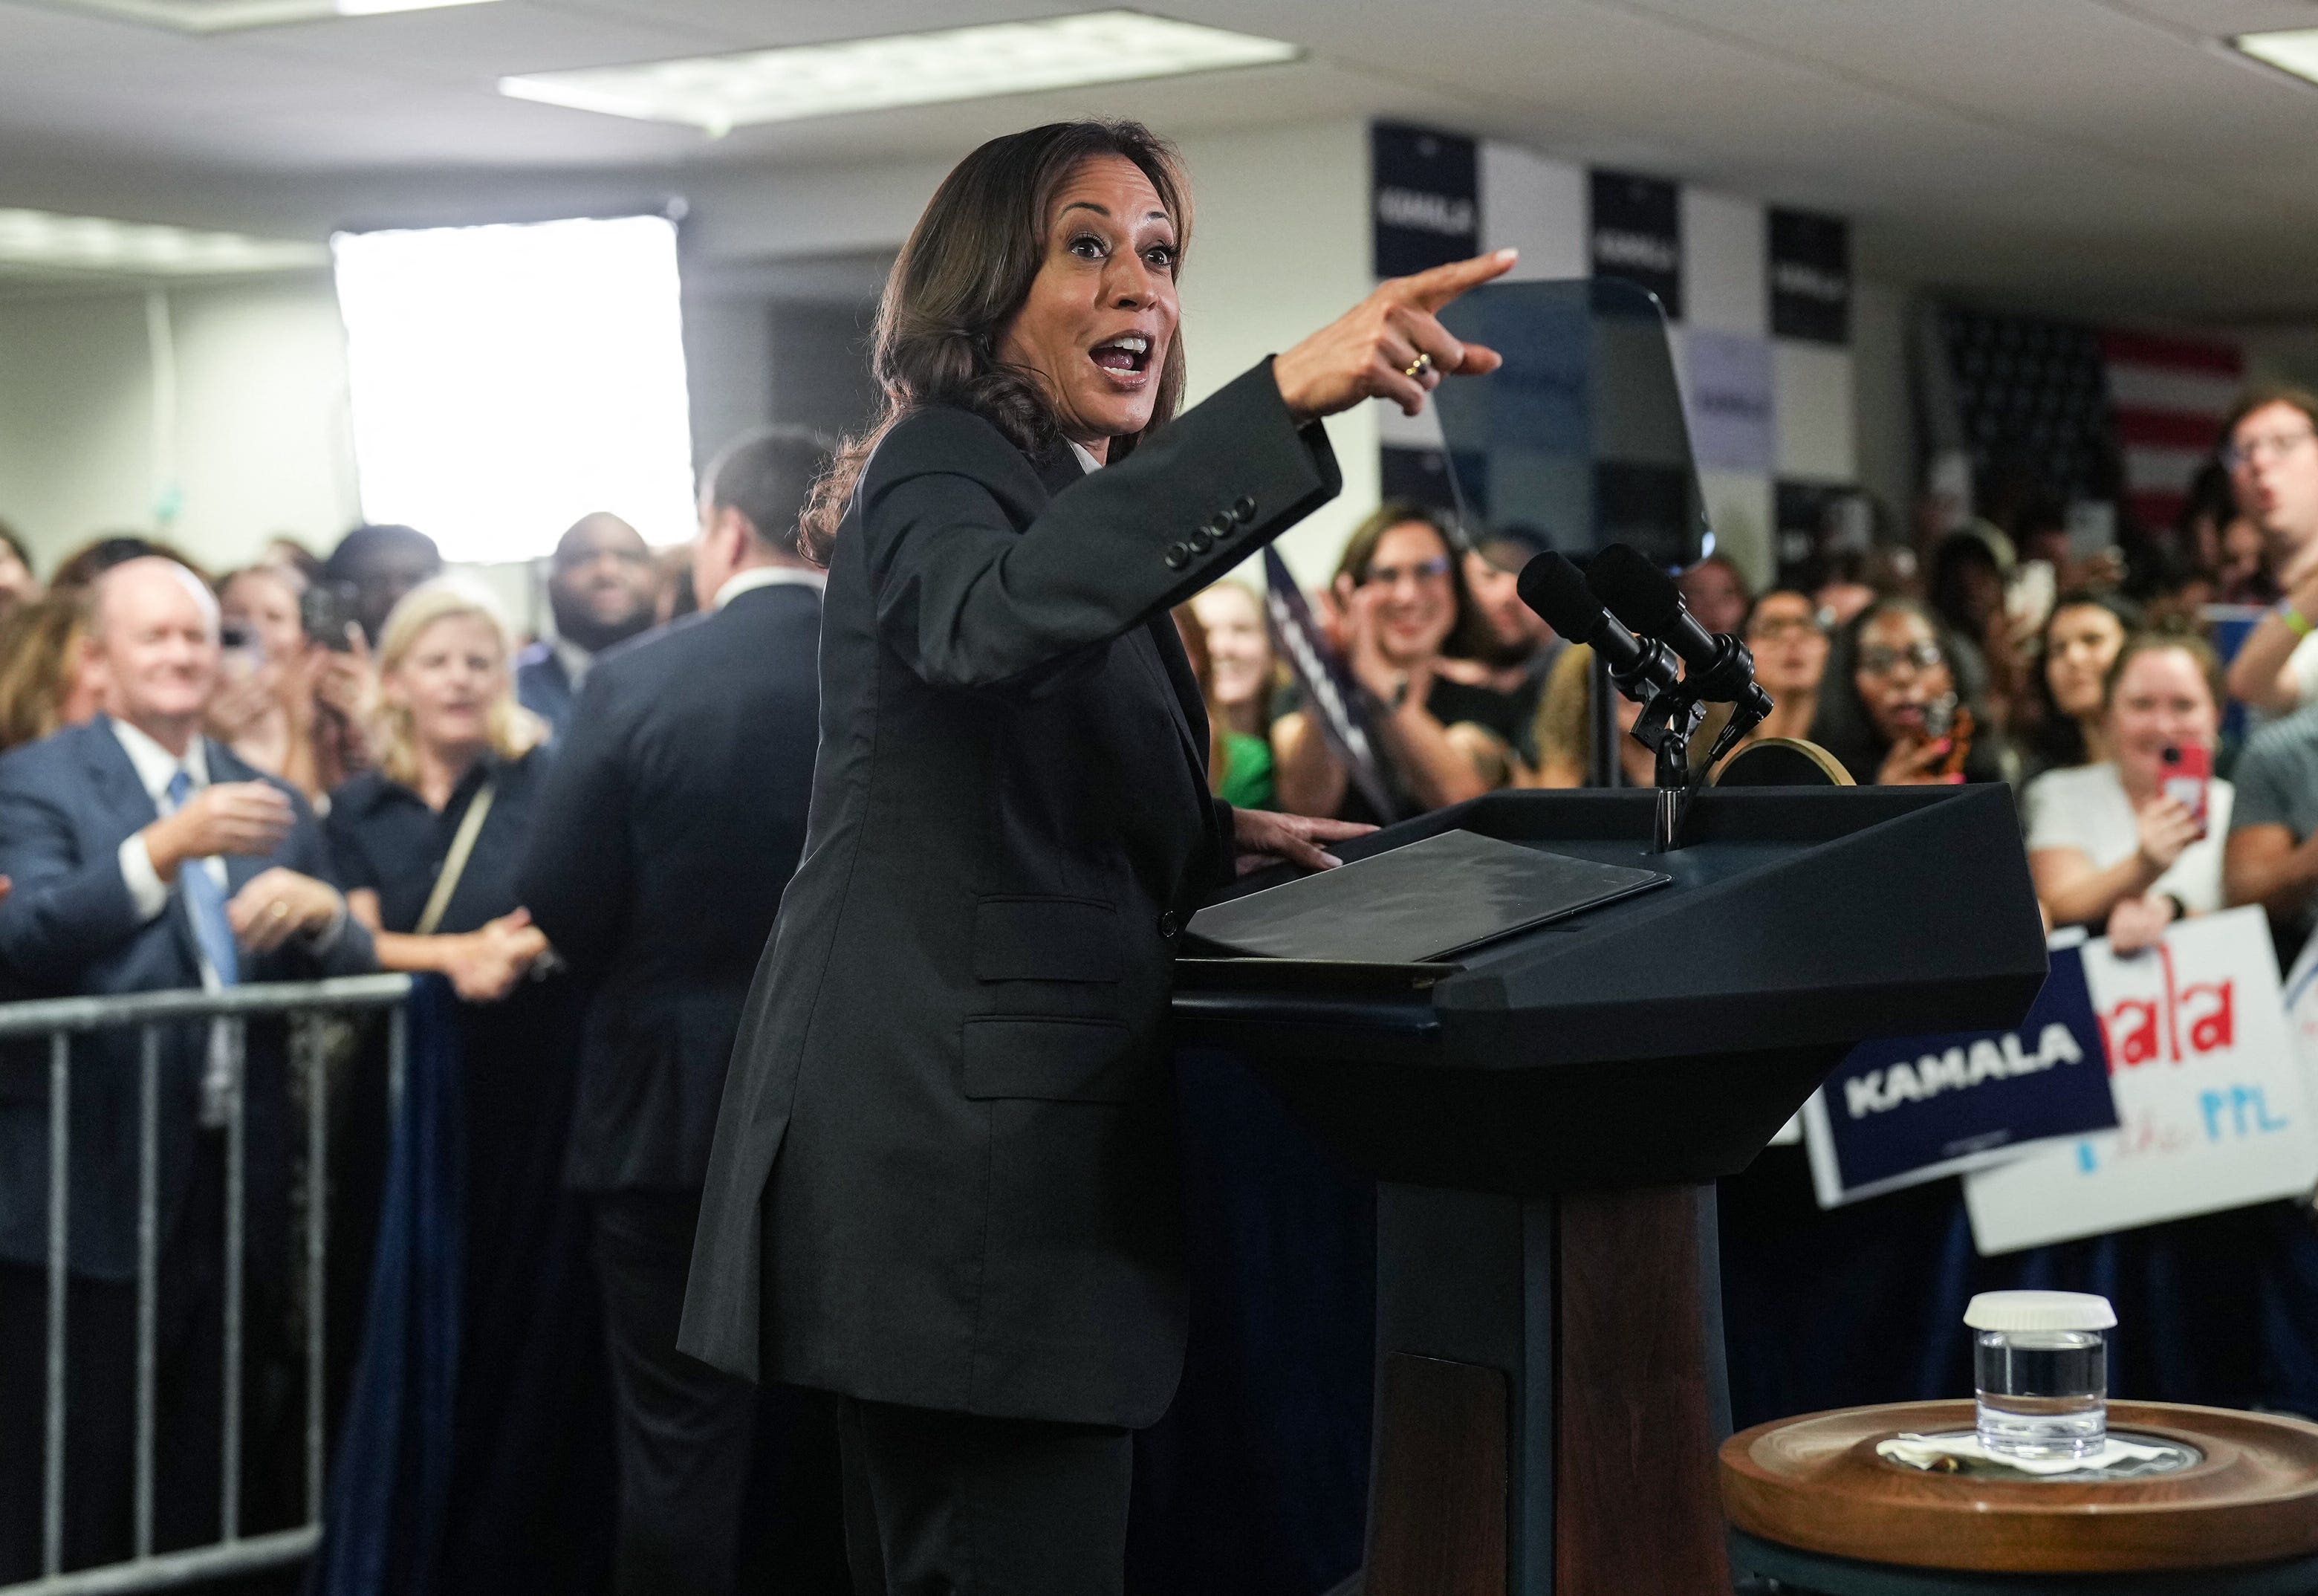 Election live updates: Harris to make first campaign stop in battleground state